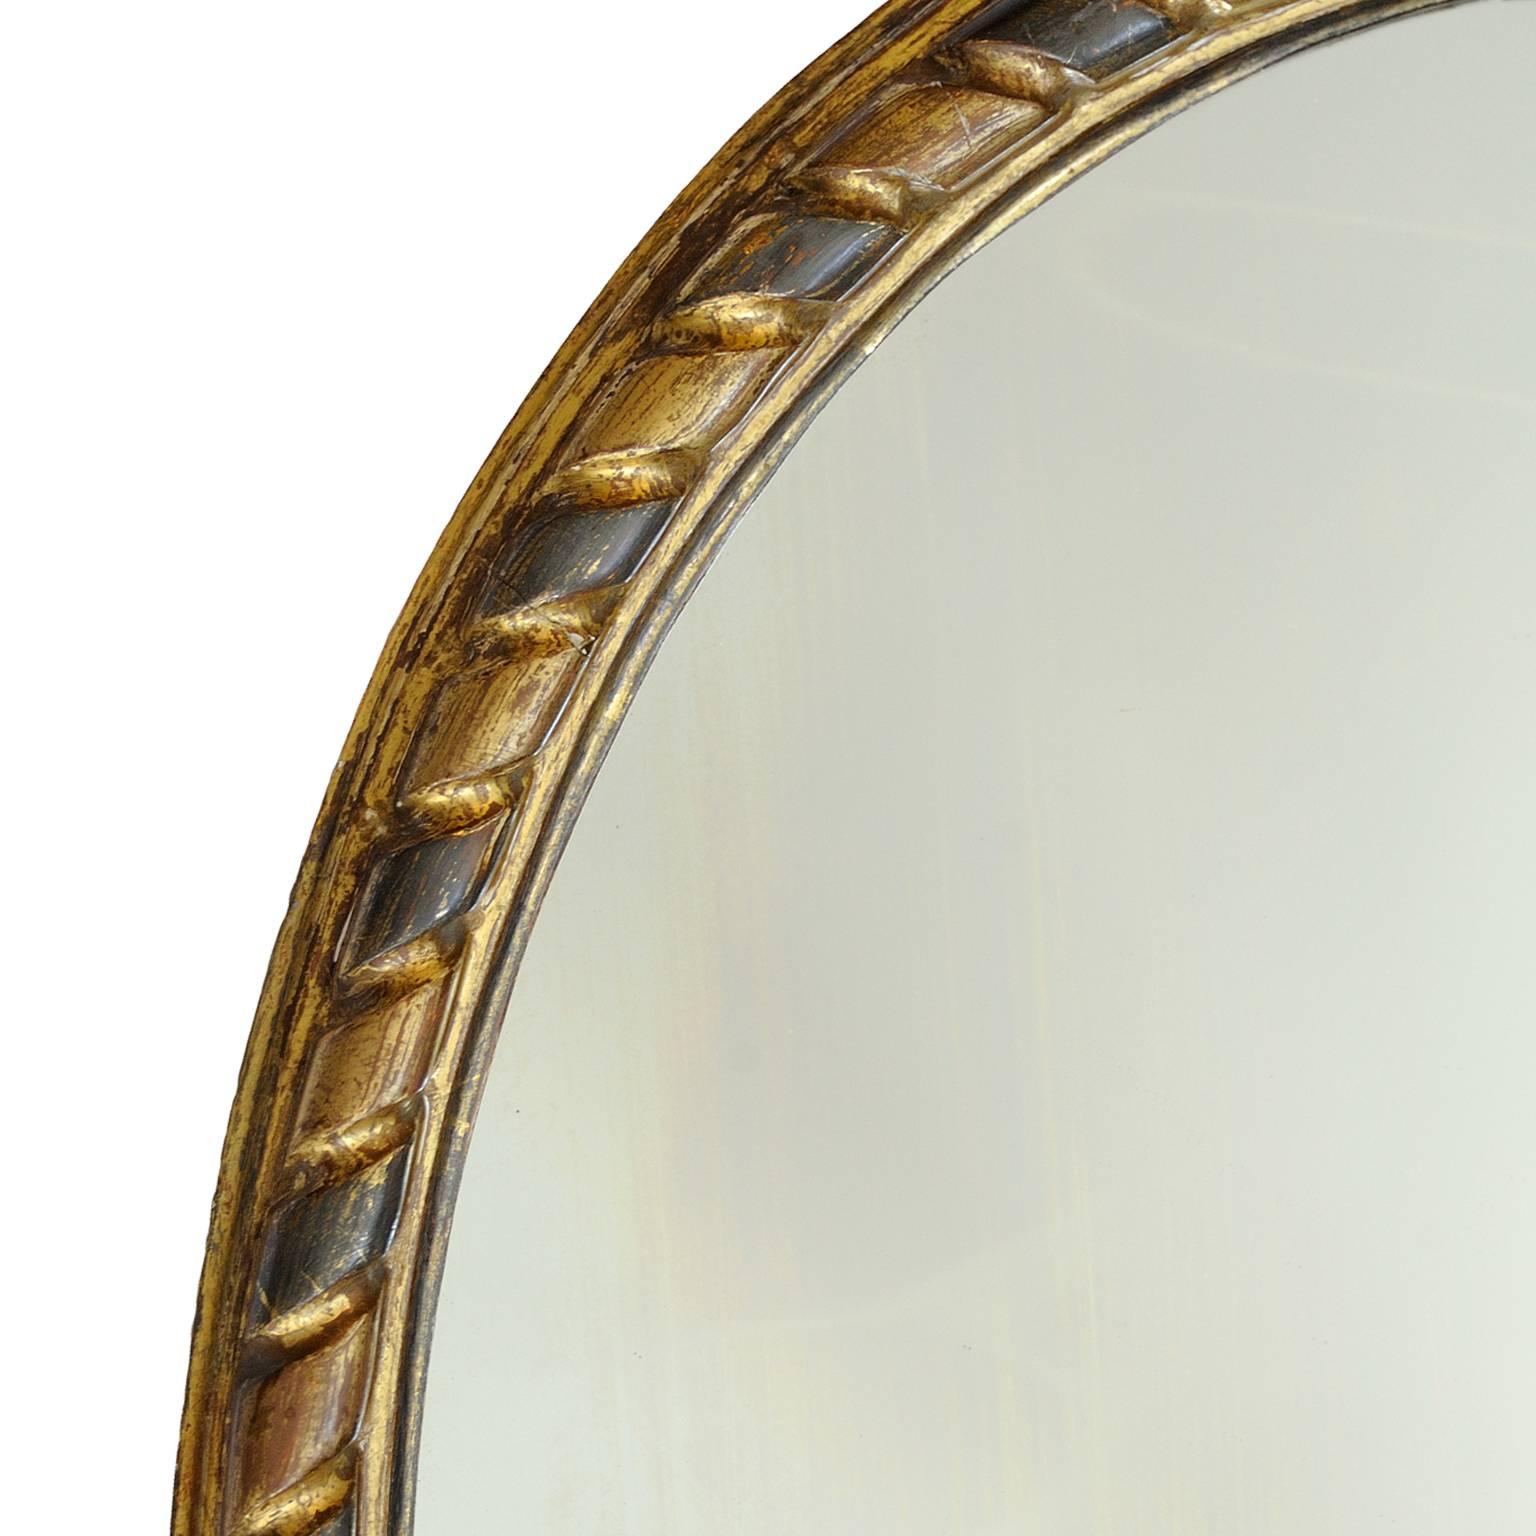 This is a lovely and very stylish Irish George III gold and silver leaf oval mirror, circa 1780.

A rather beautiful example of it's type.